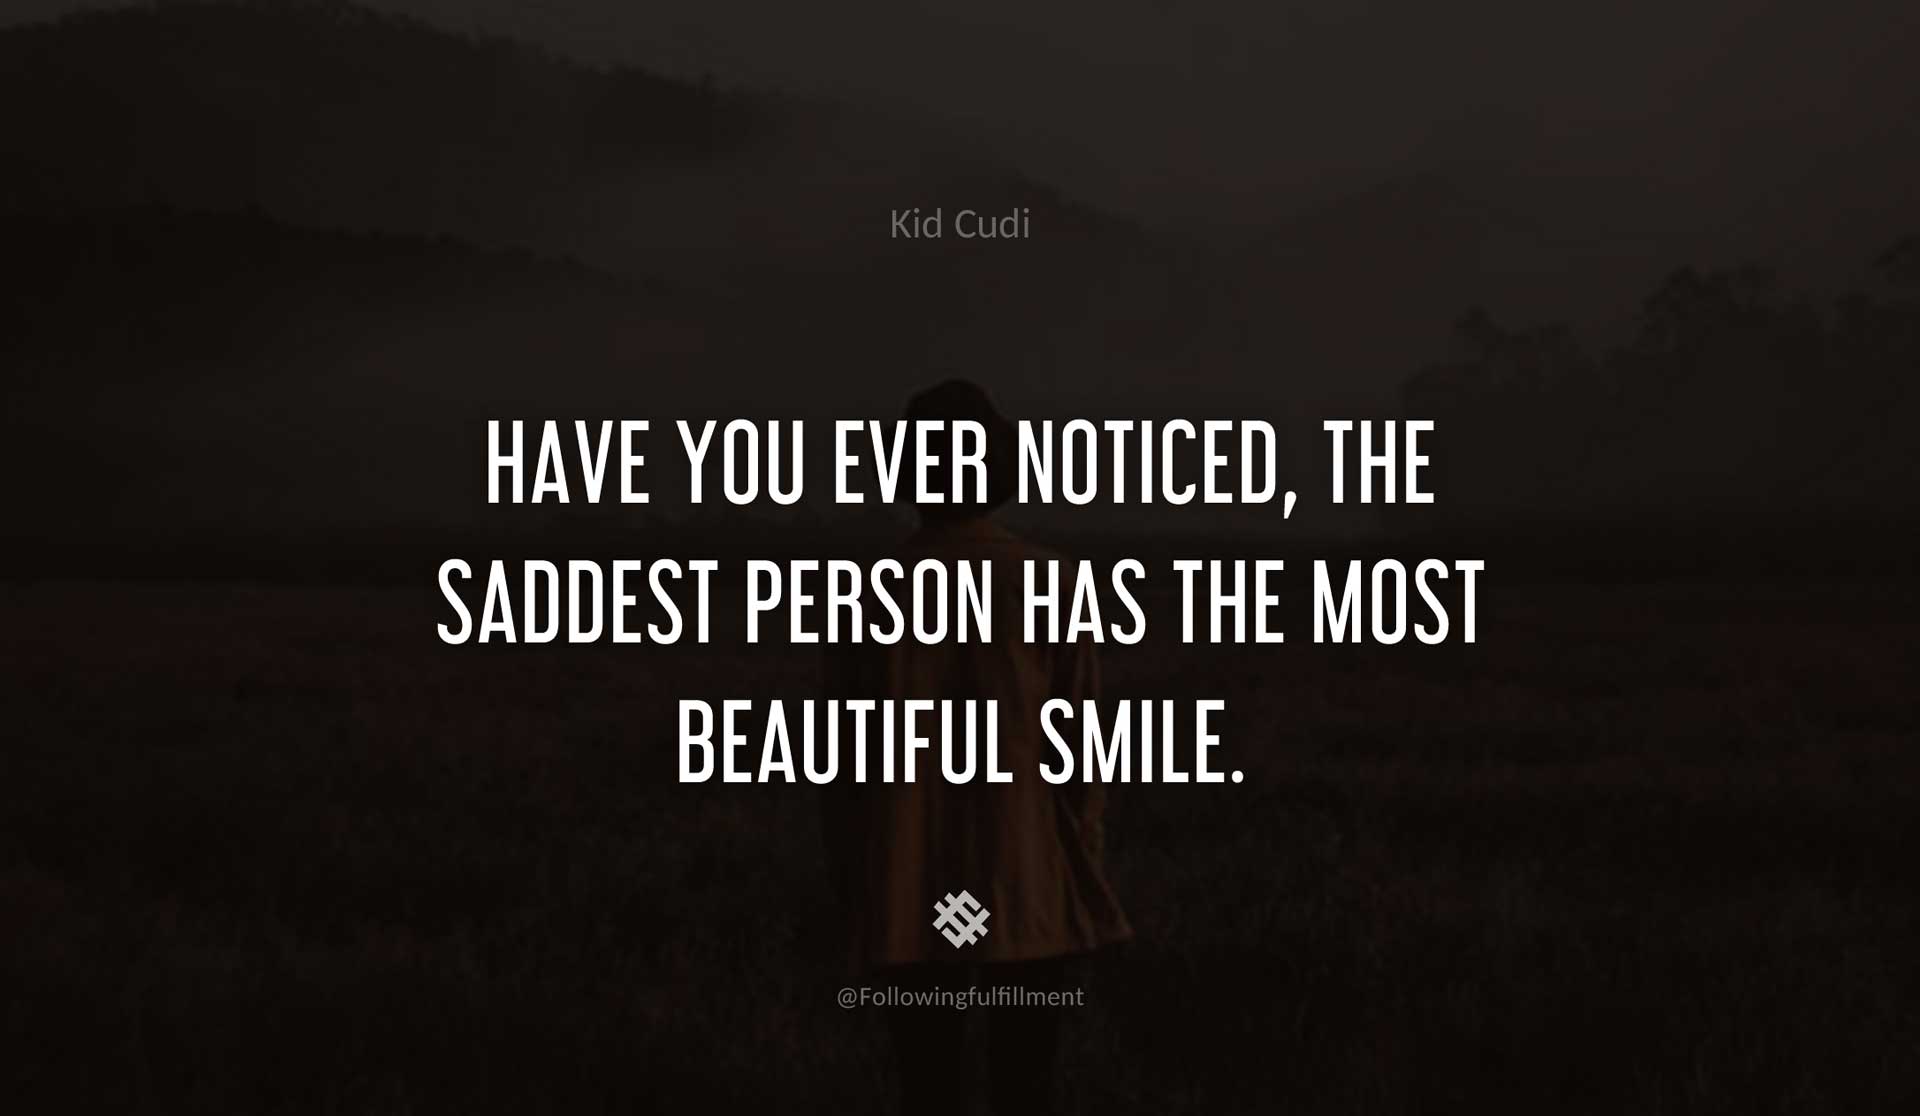 Have-you-ever-noticed,-the-saddest-person-has-the-most-beautiful-smile.-KID-CUDI-Quote.jpg